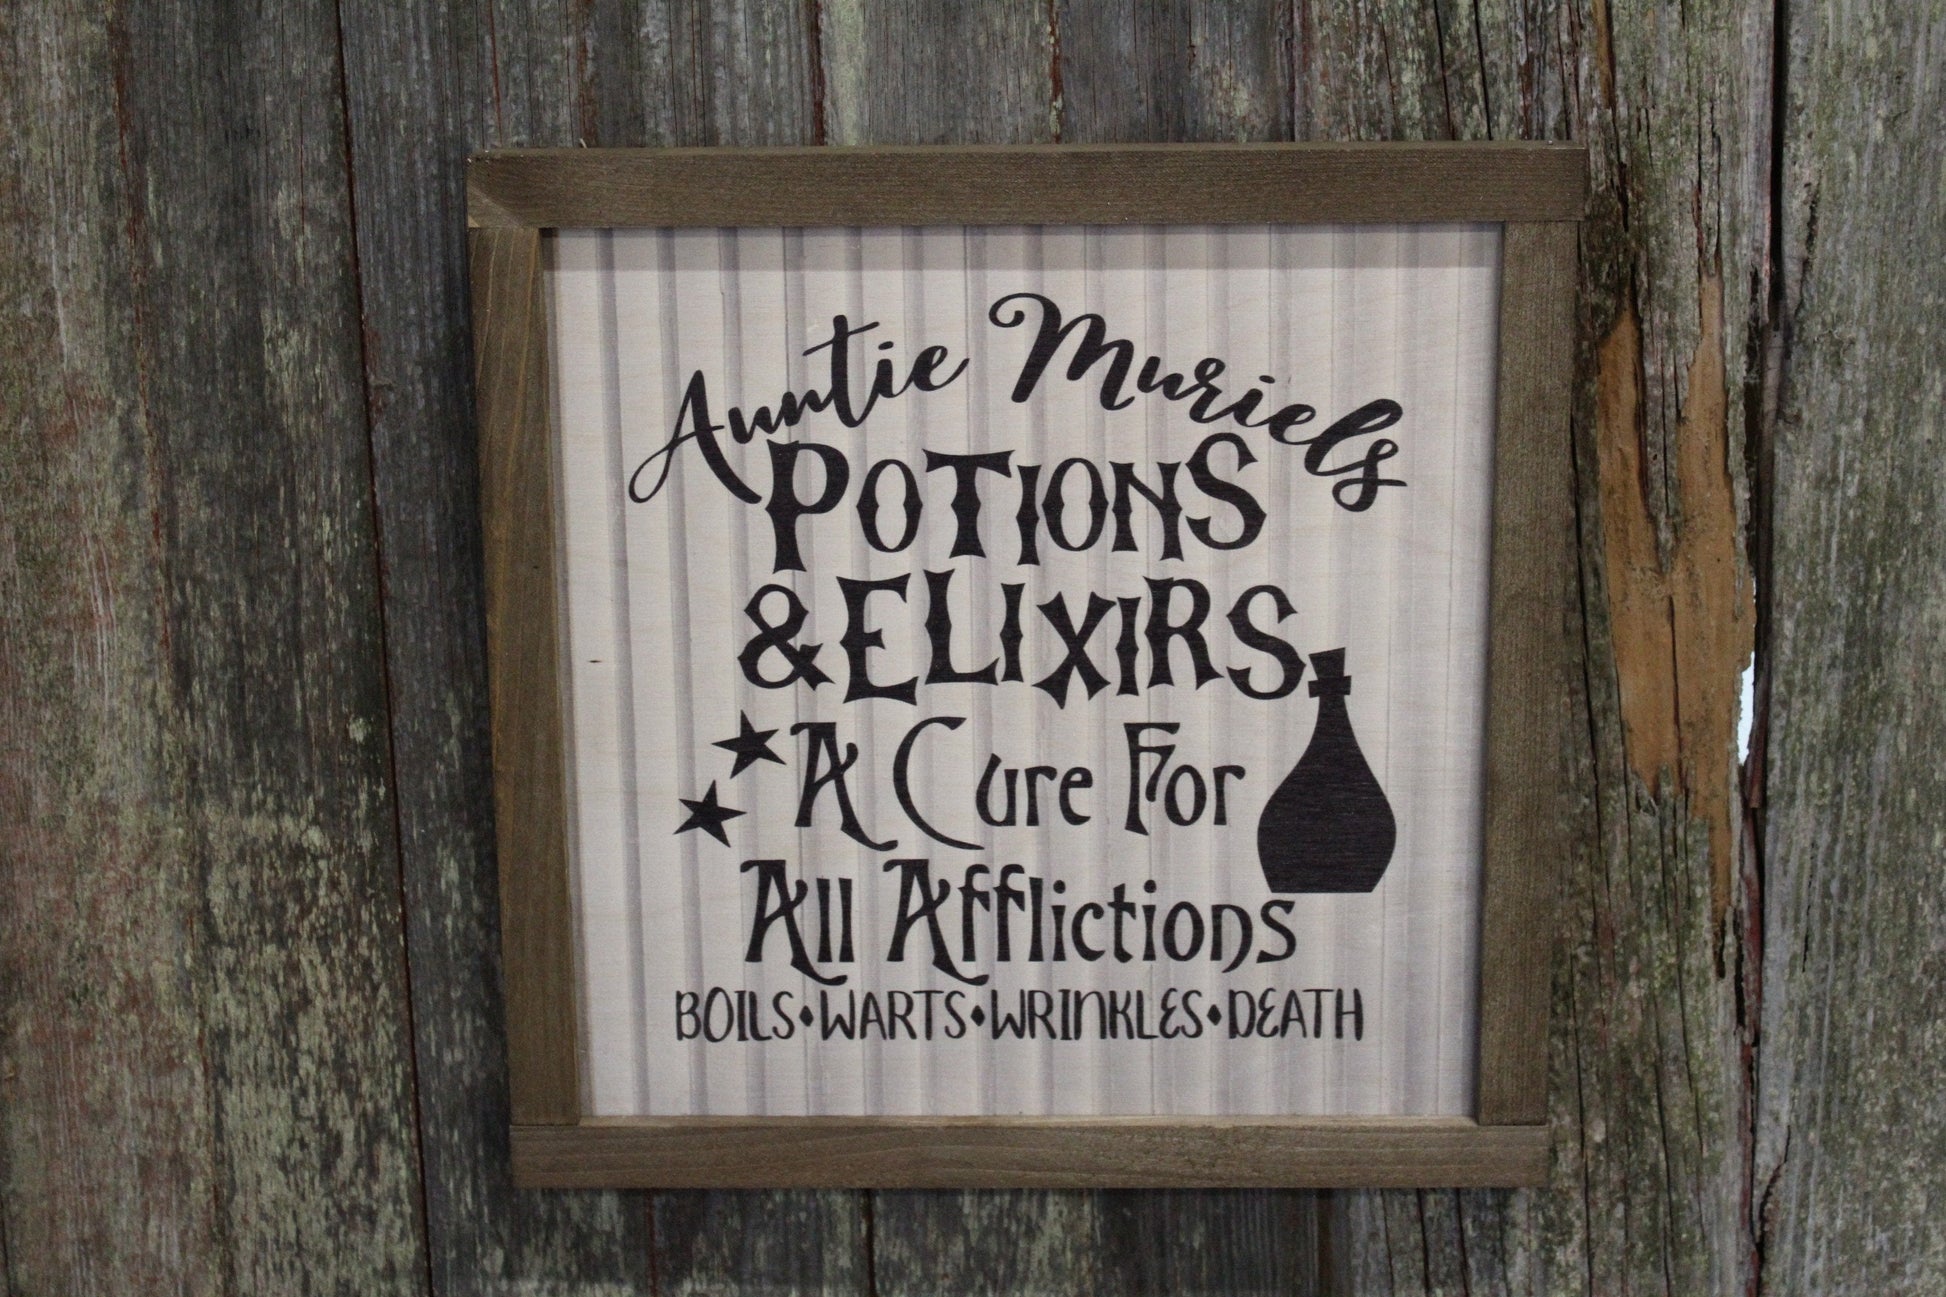 Potions and Elixirs Halloween Wood Sign A Cure For All Afflictions Shiplap Boils Worts Wrinkles Death Funny Art Farmhouse Primitive Rustic